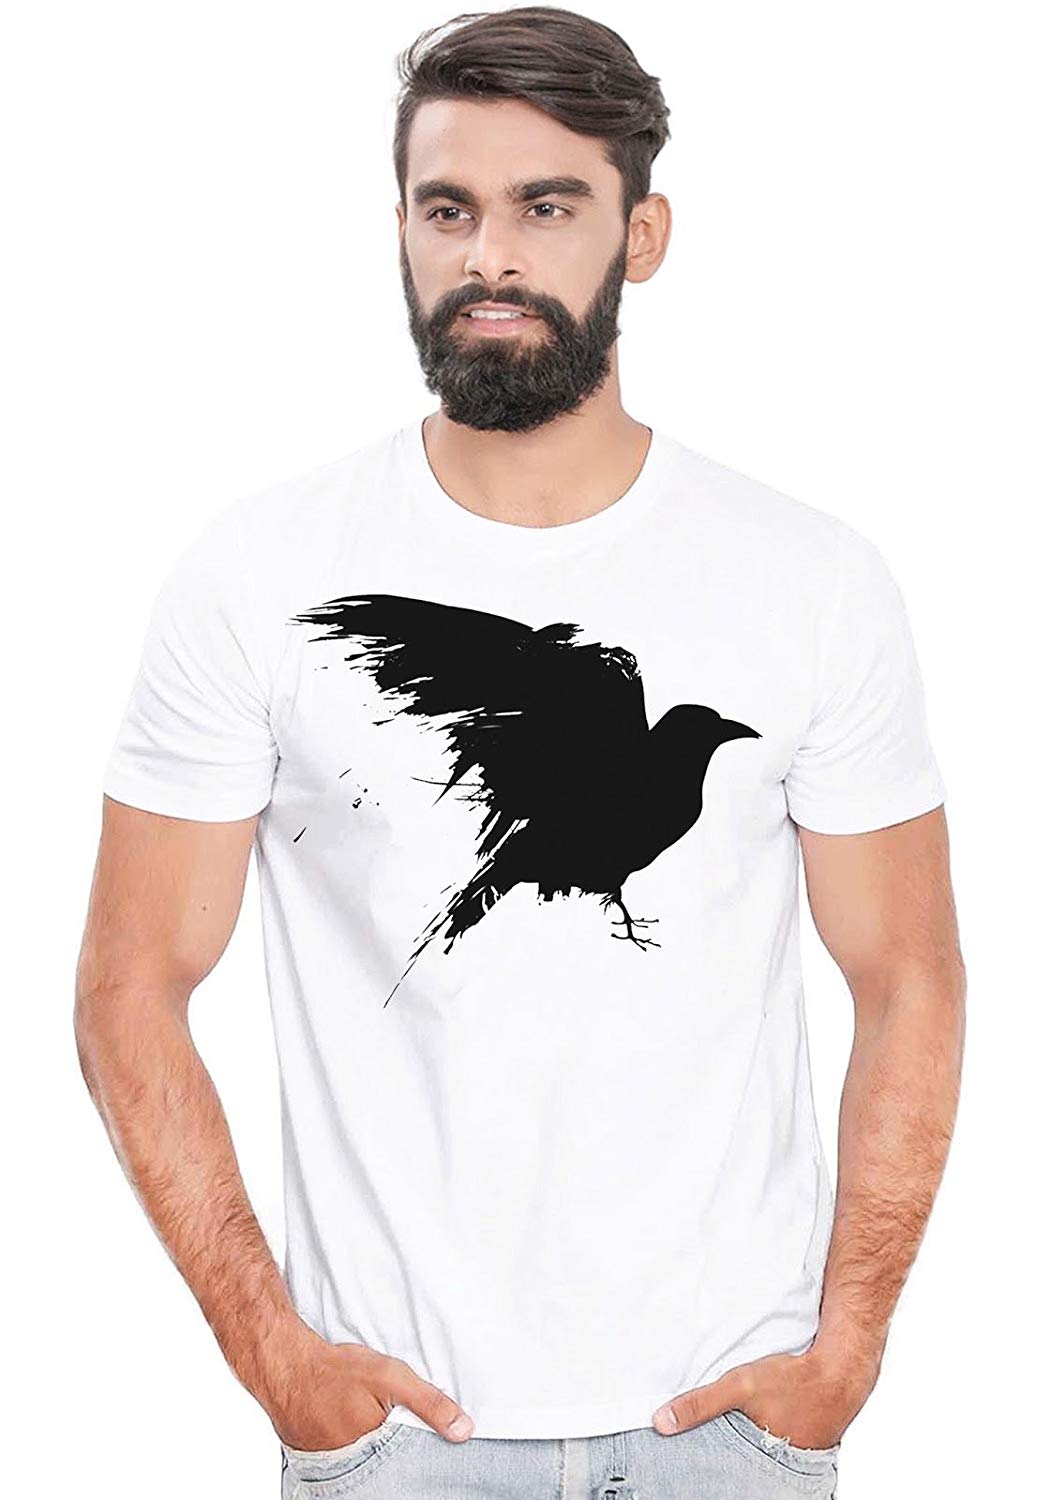 DOUBLE F ROUND NECK HALF SLEEVE WHITE COLOR FLYING BIRD PRINTED T-SHIRT FOR MEN